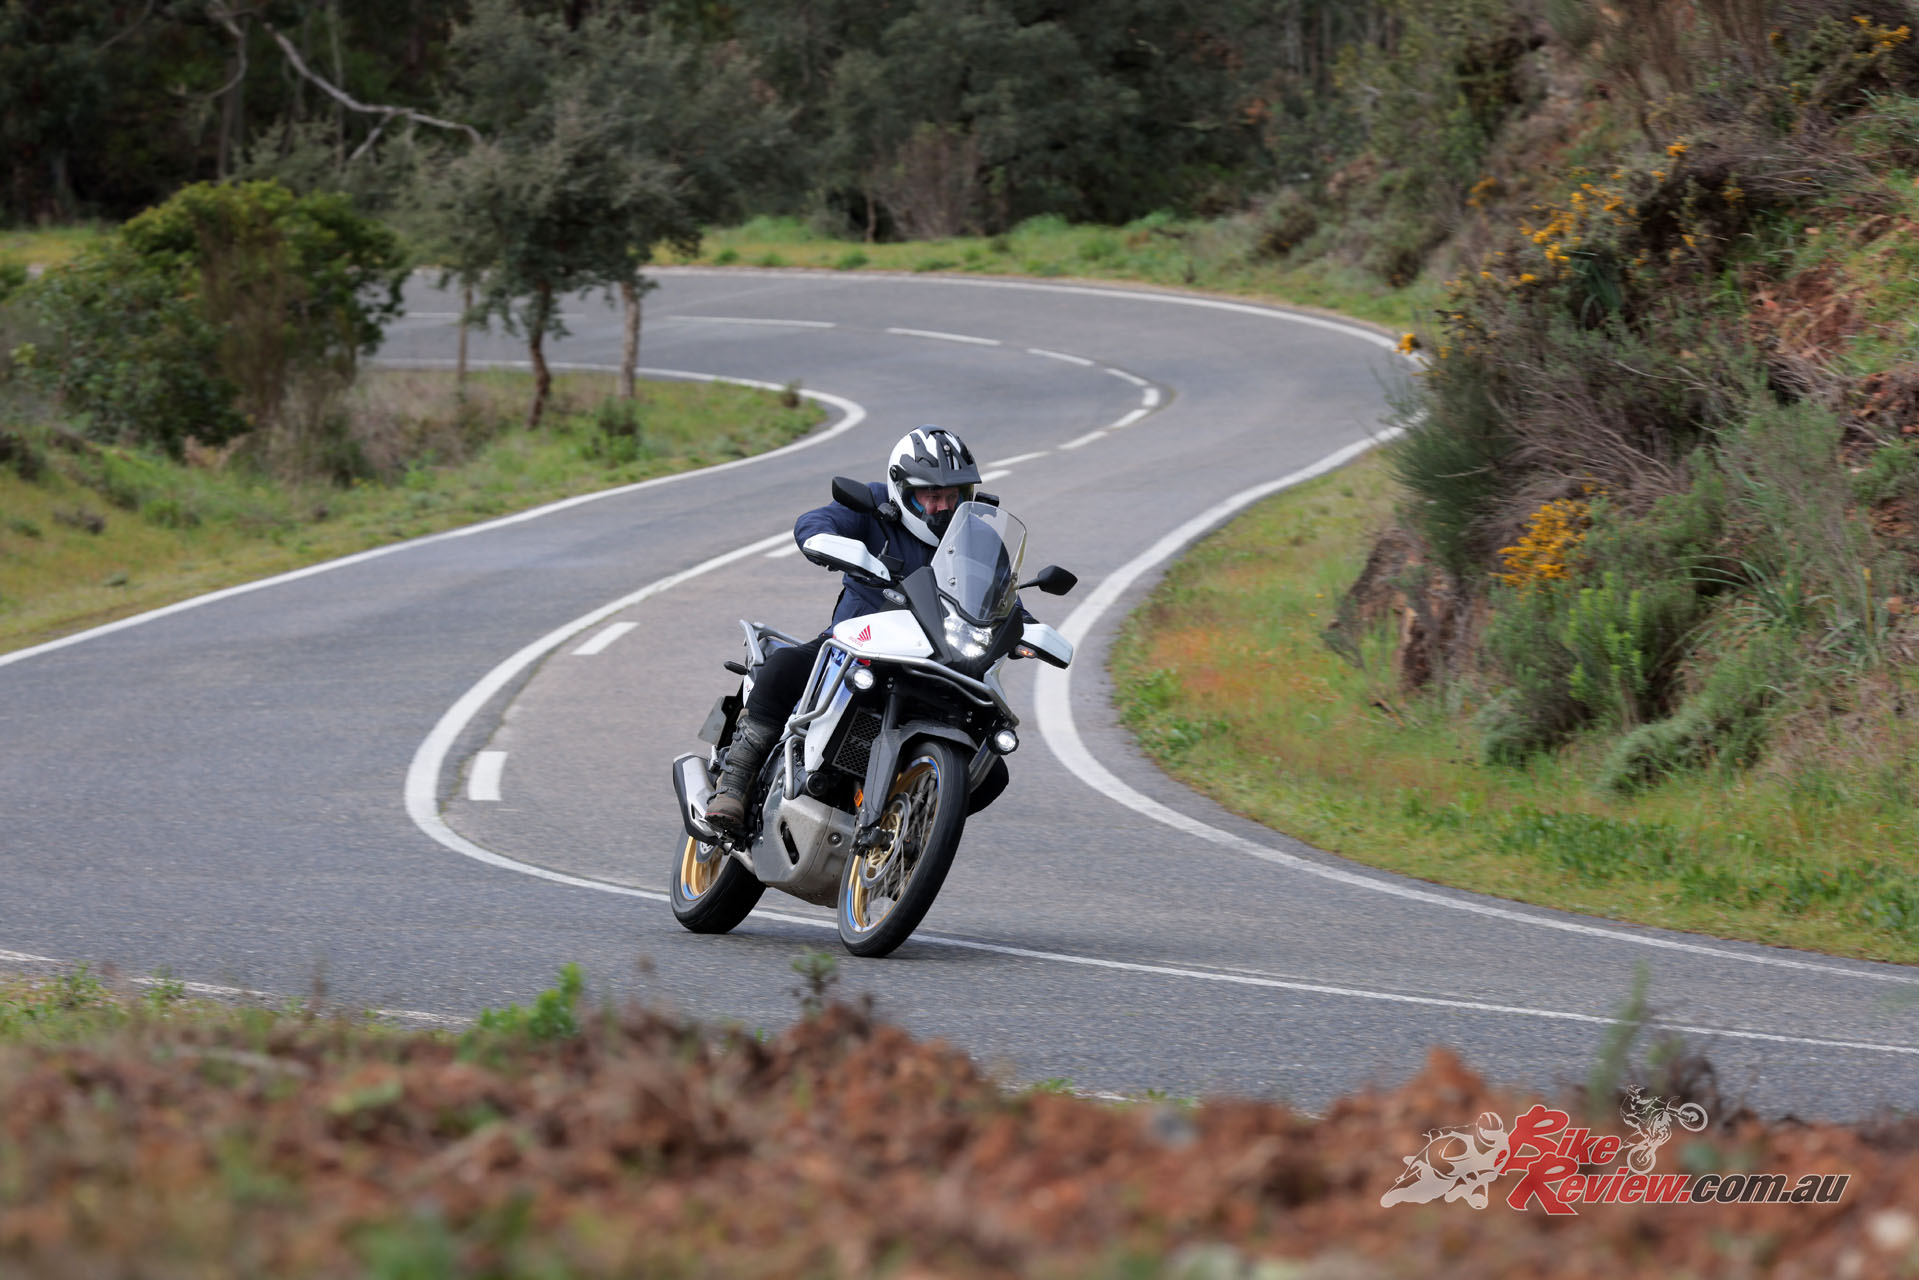 "As we head out onto the quieter roads, I really get the impression the adventure bike was going to be yet another fully sorted Honda that's hard to fault."